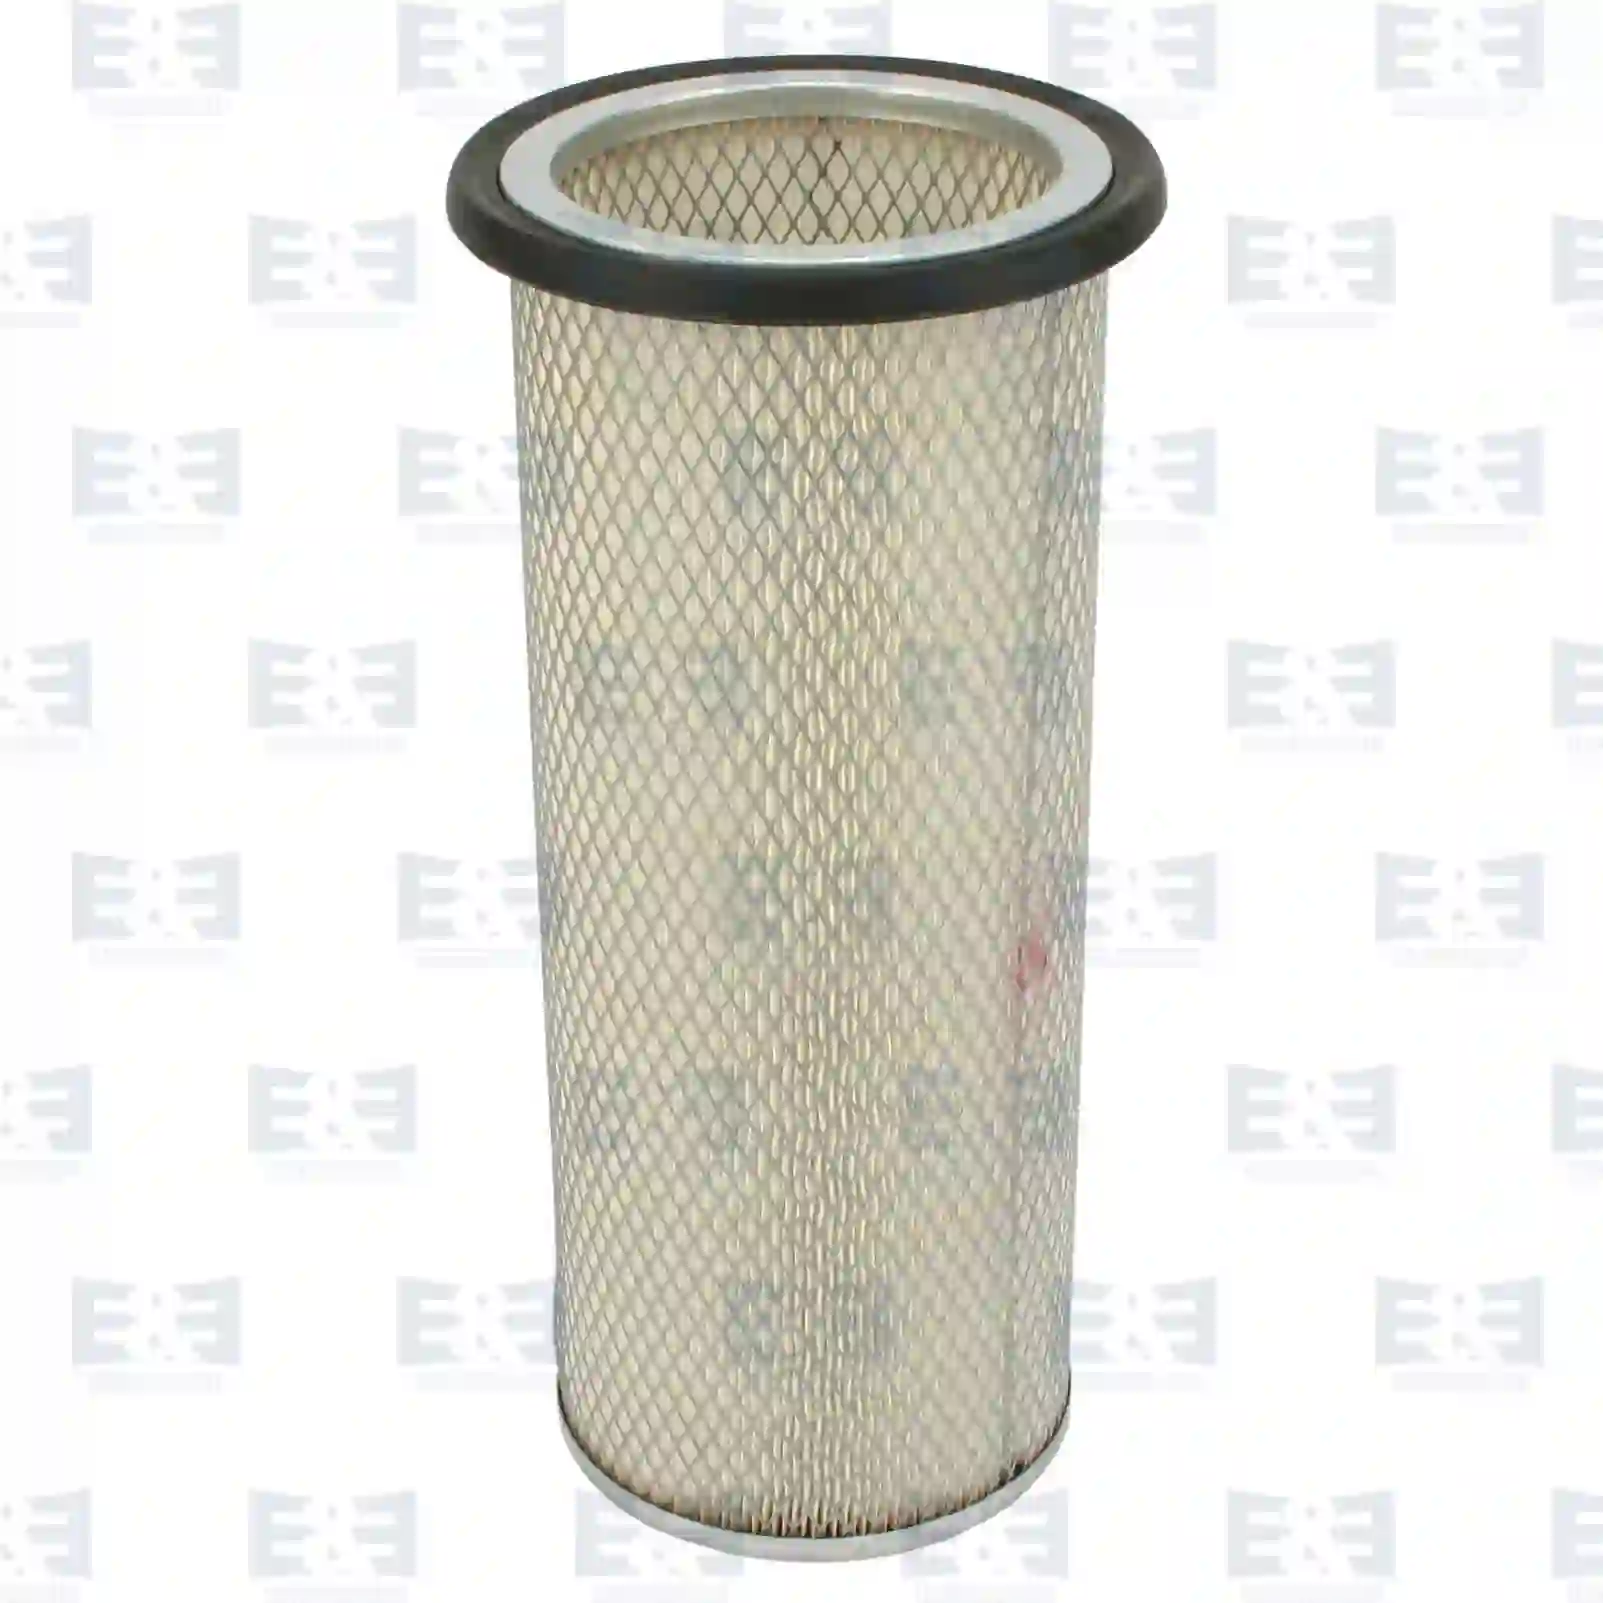  Air Filter Air filter, inner, EE No 2E2204073 ,  oem no:6624773, 6624779, 70662471, 70662477, 00104147, 529821R1, 702323C1, 702323C91, 926784C1, L35496, 3I-0126, 77-6258, 8C-3047, 94-6081, 9Y-6804, J3564119, 204639, 3013209, 3325291, 44749049, 447490498, 44749049S, RDK6220, 02352343, 6953106, 963533, 00104147, 00662477, 01849107, 01930248, 01930748, 07662477, 08721029, 321549250, 708721029, 70662447, 70662477, 76040385, 77662477, 78721029, 79043781, Y05811009, 276767, DNP119373, 6487136, 9304100074, 178011090, 178011090A, 346320100, 1930748, 4337639, 502827, L4085788, L4337639, 7000311343, 1-14215033-0, 1-14215034-0, 6-00181423-0, 9-14215034-0, 01930748, 08016966, 1930748, 70662477, AT131683, AT166136, U44956, 34000330, 40247-7900, 7010578, 7362687, 2191P119373, 08108304005, 55508304015, 56084040507, 81083040050, 1070230M1, 1089937M91, 525612M1, 0030941304, 3000940304, AE063155, ME063155, 16545-96019, 16546-96014, PI02739, 0003564119, 0003564138, 5000890293, 6005019714, R637S, 41017301, 142004, 310814, 3291796R1, 9377816, 1654696014, 1654696125S, 1654696126, 1654699226S, 1654699512, 16546CW40S, 16546NB00K, 16546NB01JS, 5051A103, 10562958, SH12254, 1911724, 20002266390, 475082, 6239143, 79384780, 12665412620 E&E Truck Spare Parts | Truck Spare Parts, Auotomotive Spare Parts